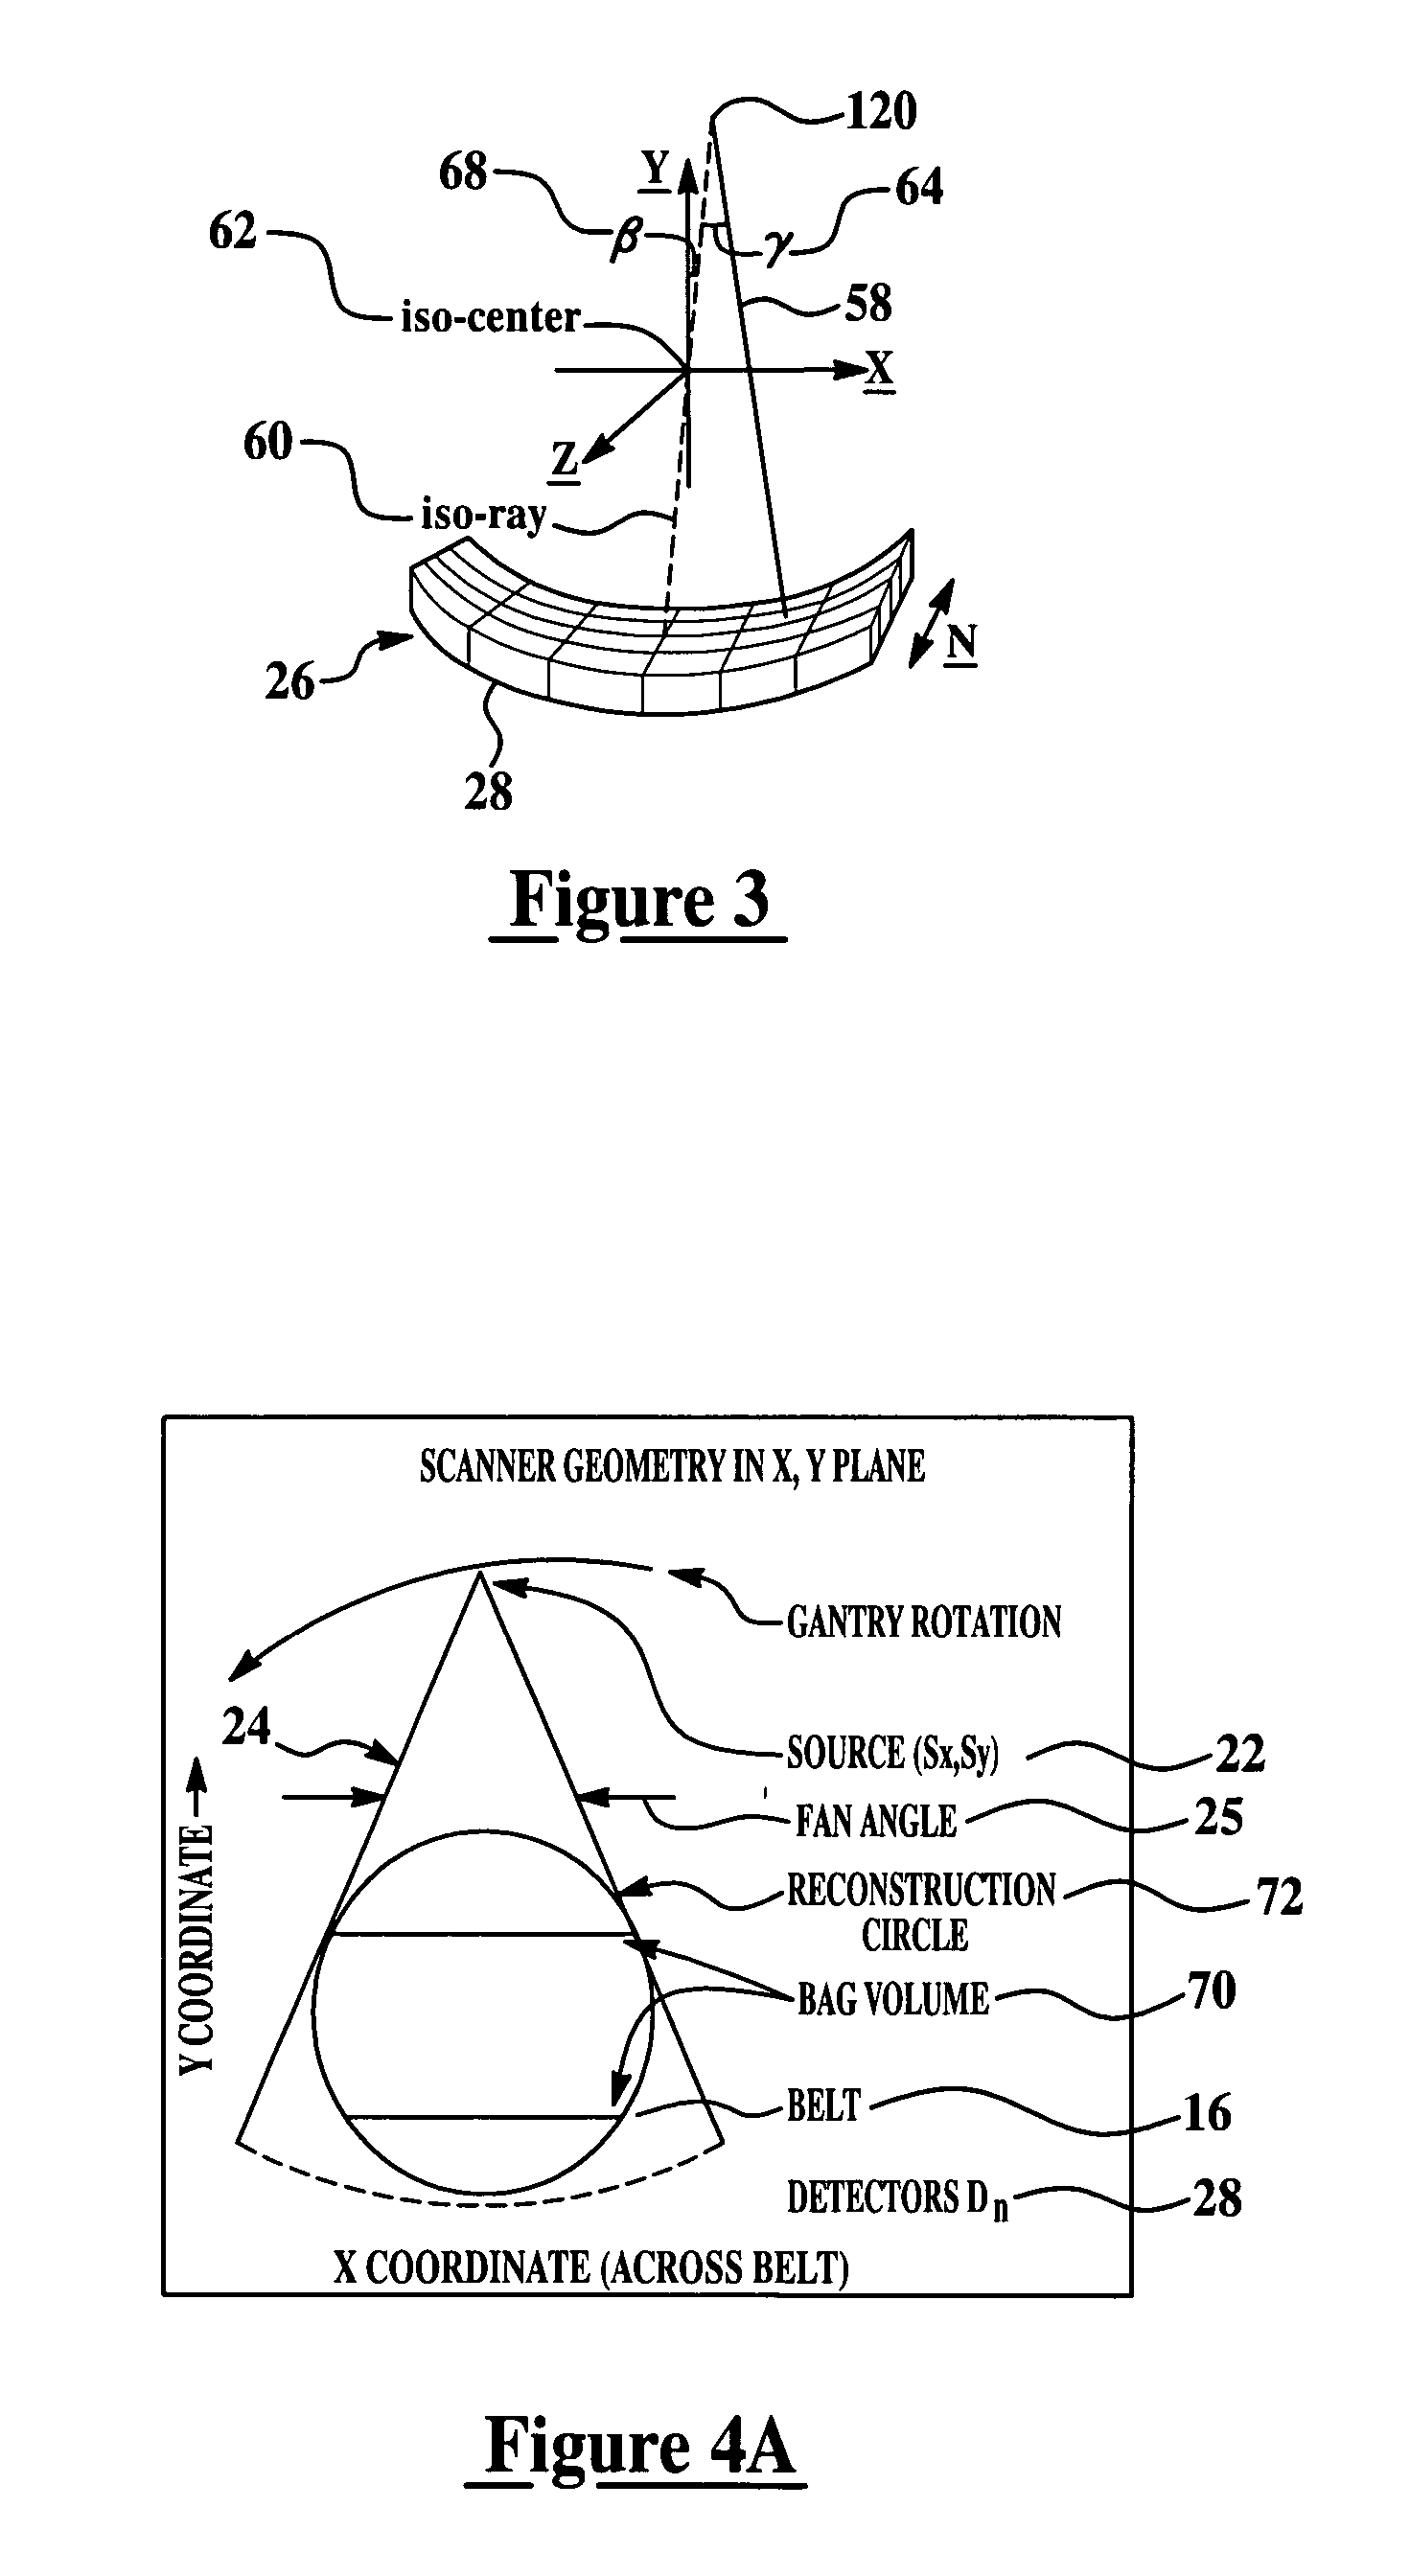 Apparatus and method for providing a near-parallel projection from helical scan data